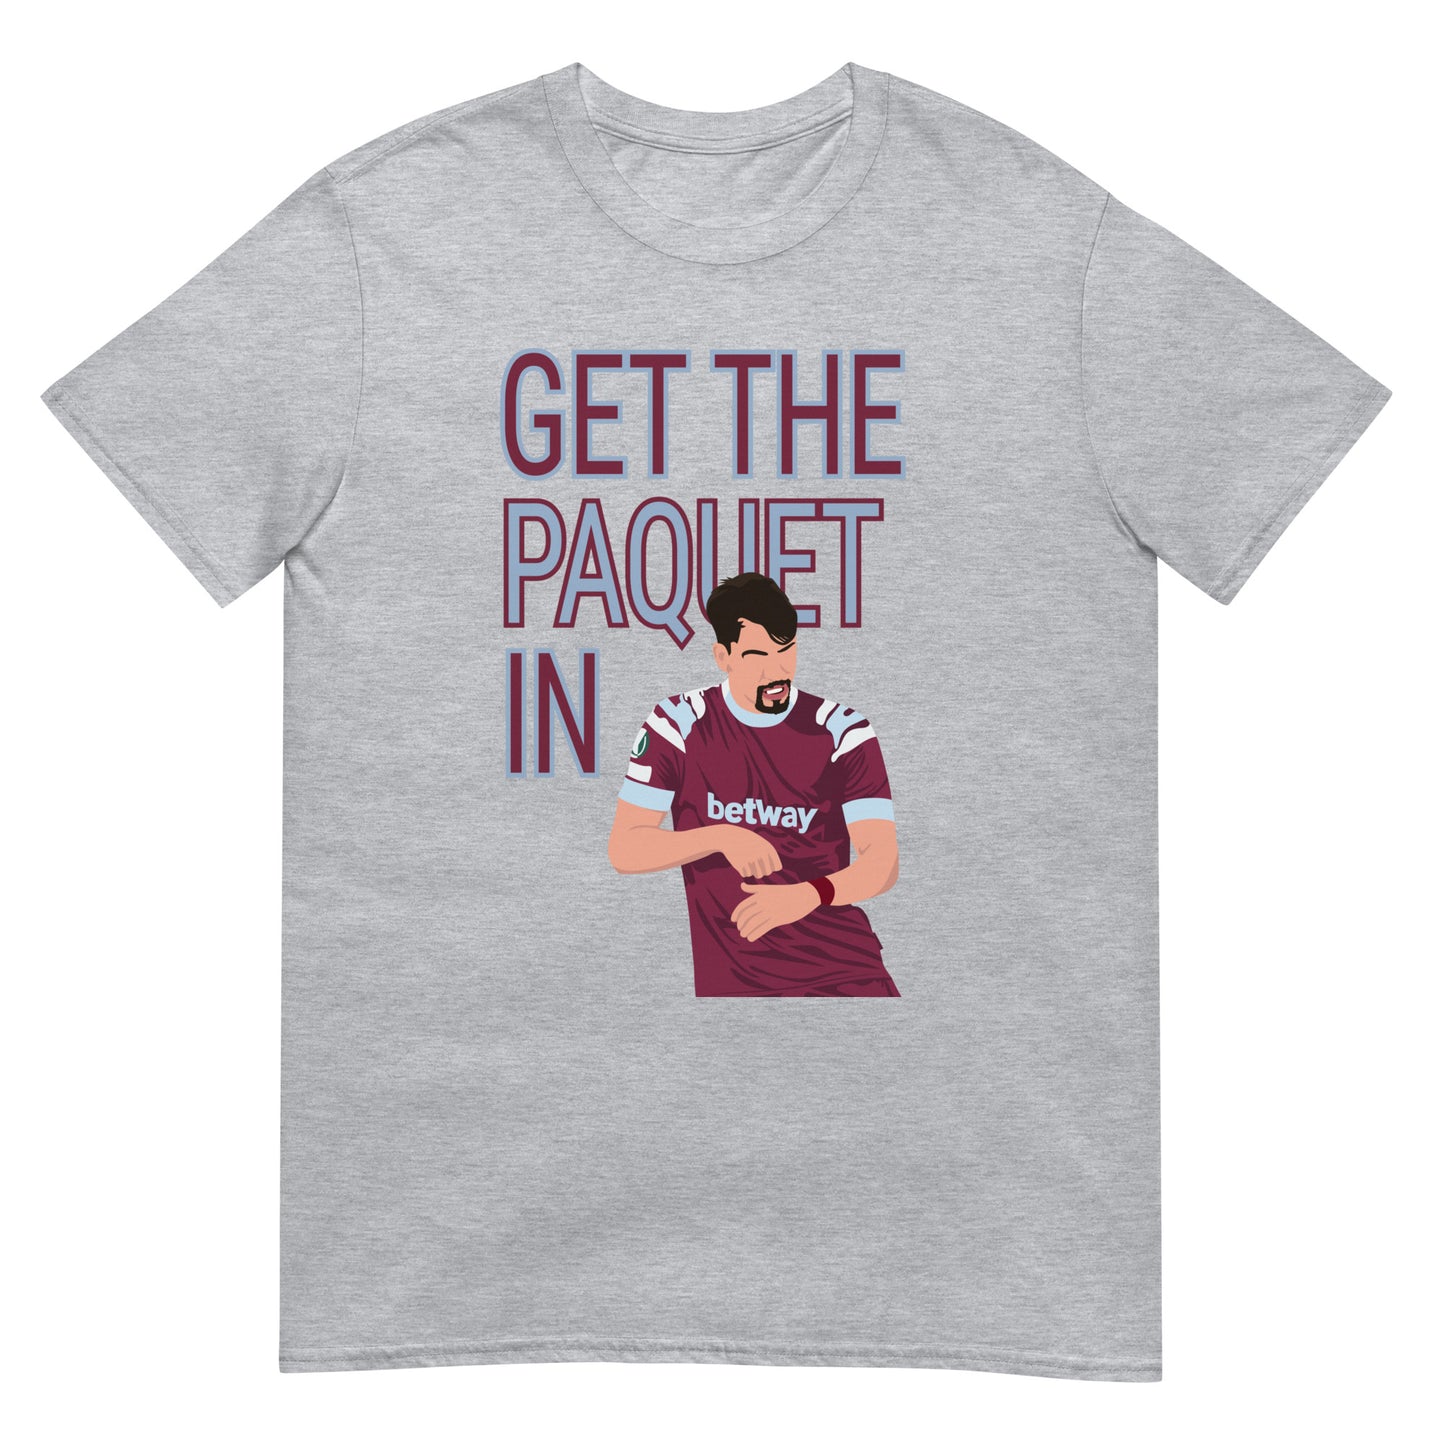 Get the Paquet in Short Sleeve T-Shirt